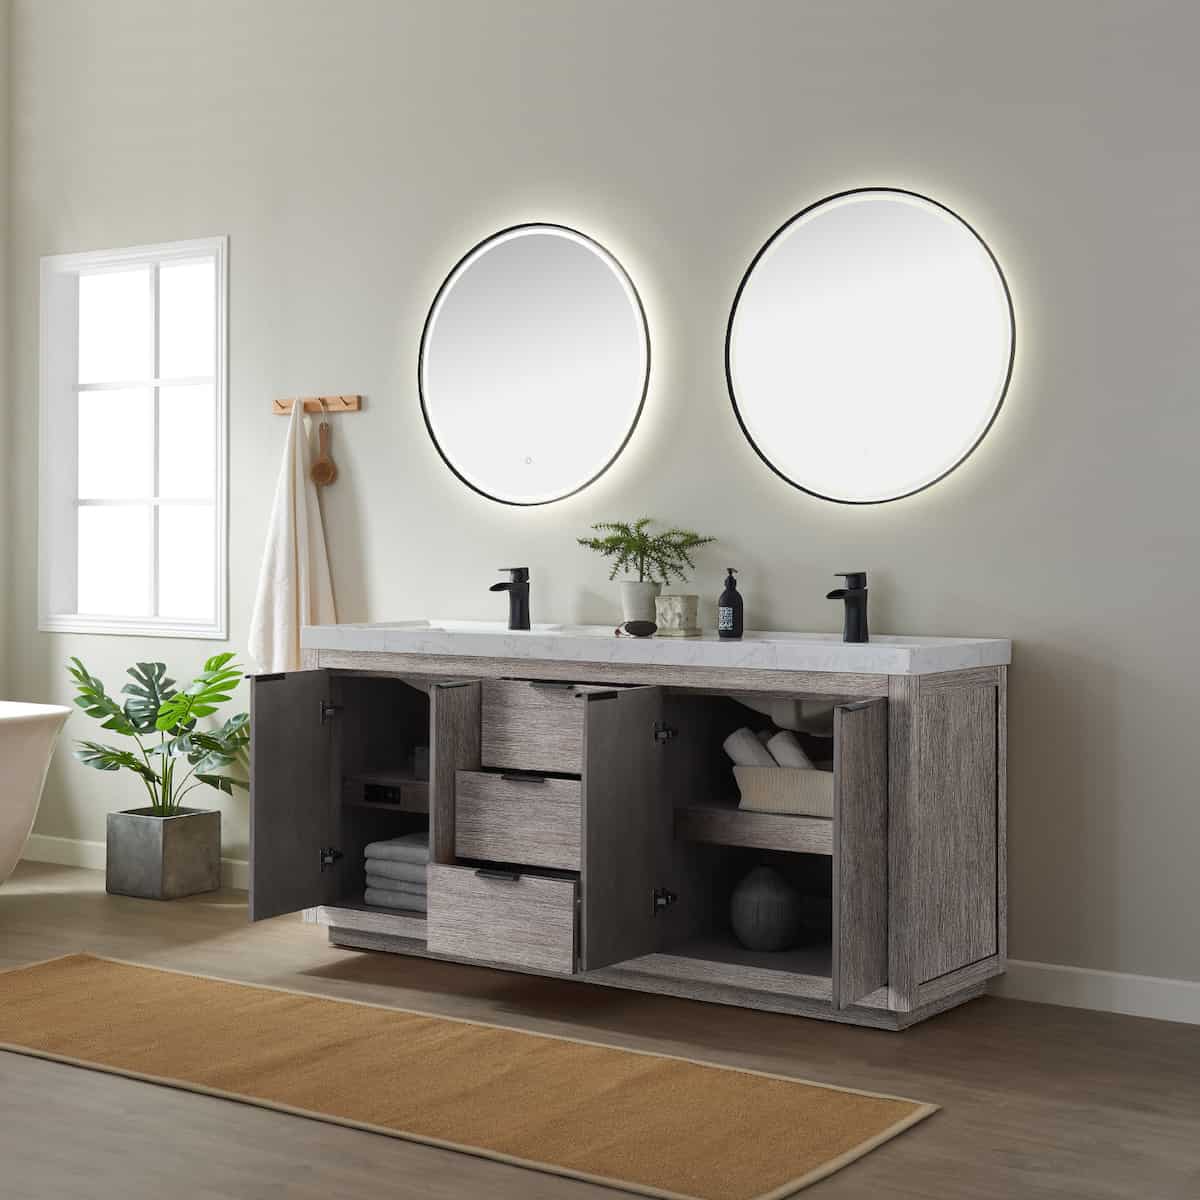 Vinnova Leiza 72 Inch Freestanding Double Vanity in Classical Grey with White Composite Grain Countertop With Mirrors Inside 701572-CR-GW